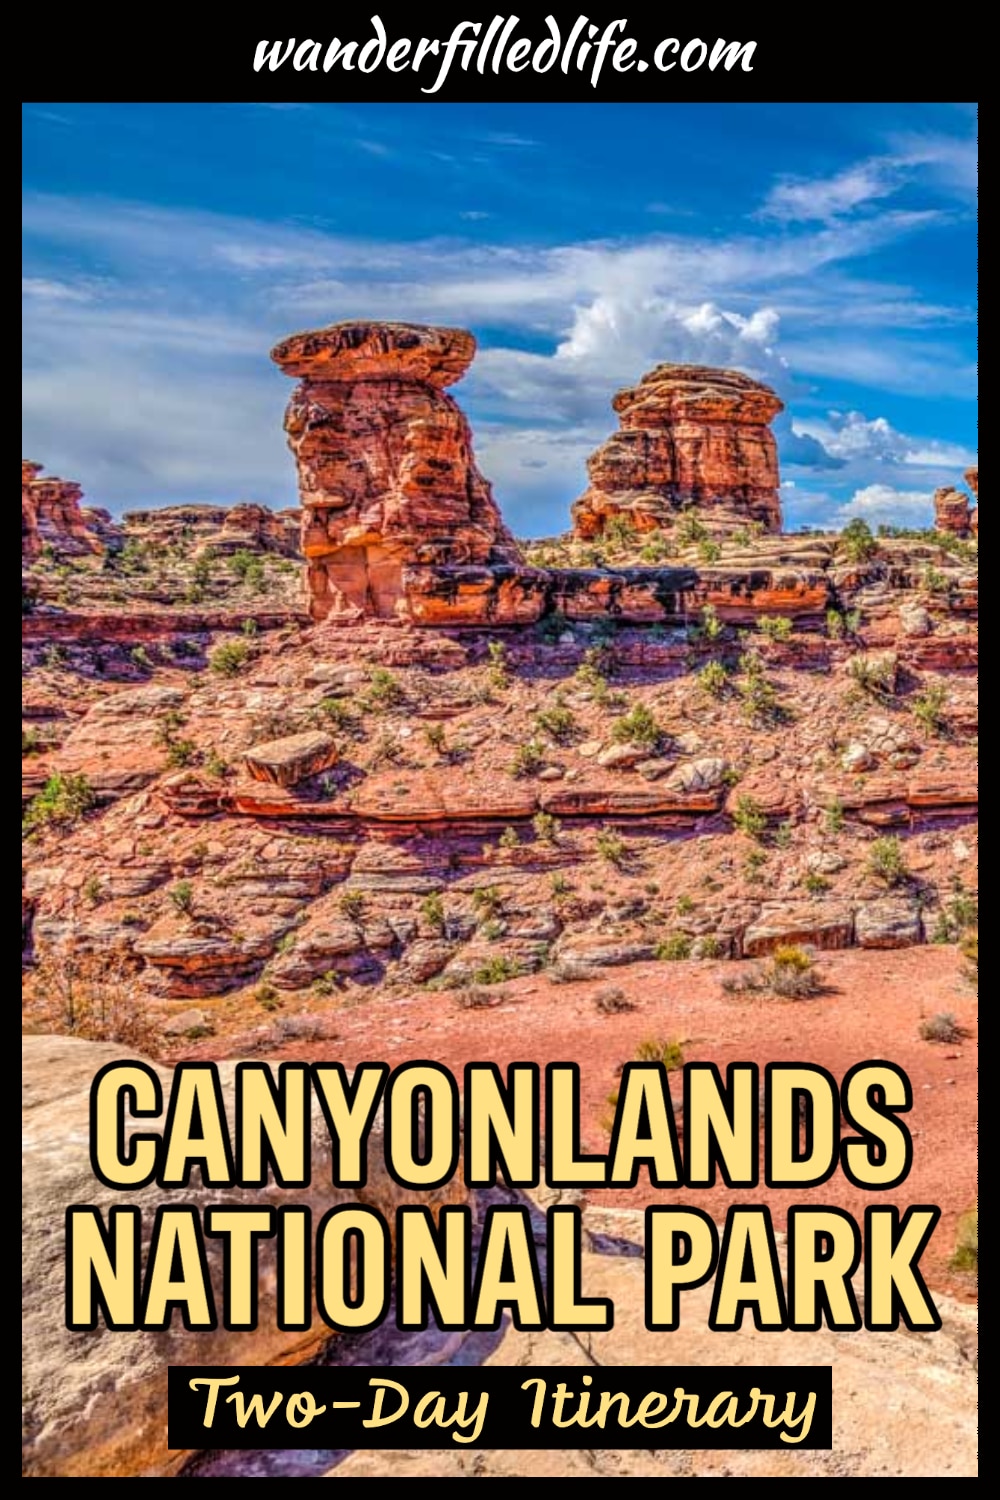 Visiting Utah's national parks? Our Canyonlands National Park itinerary will help you plan a two-day visit to this majestic landscape.